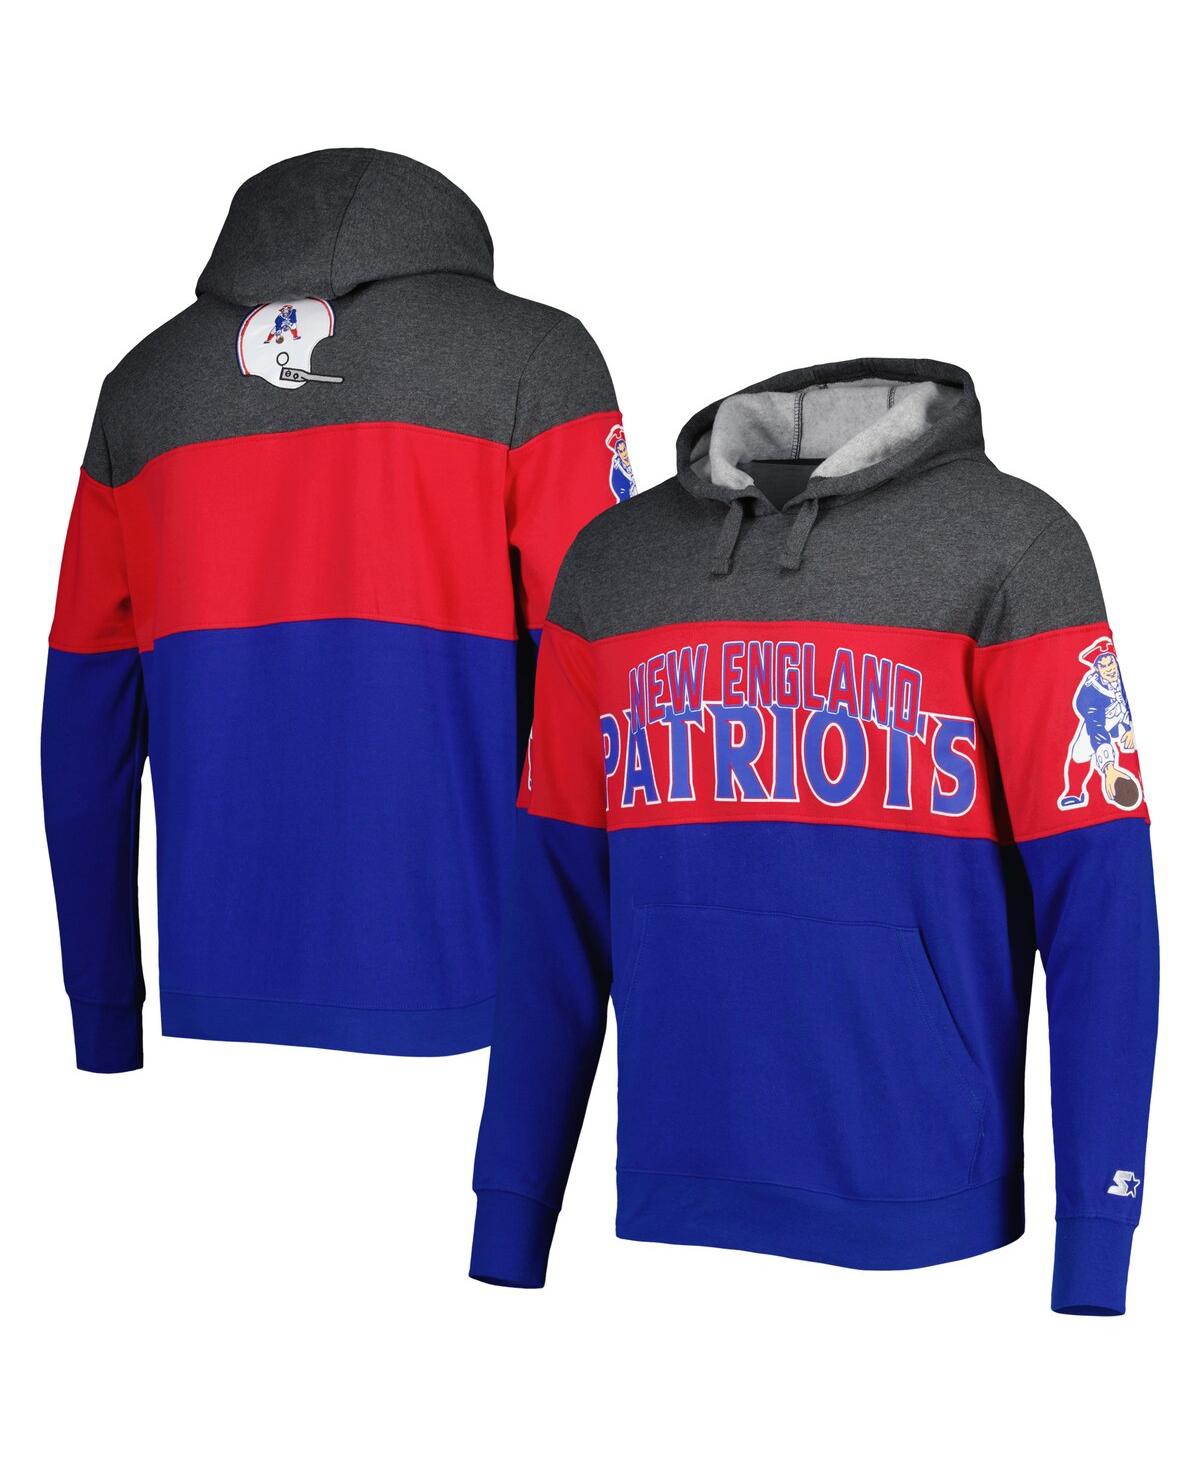 Men's Starter Royal, Heather Charcoal New England Patriots Extreme Vintage-Like Logos Pullover Hoodie - Royal, Heather Charcoal